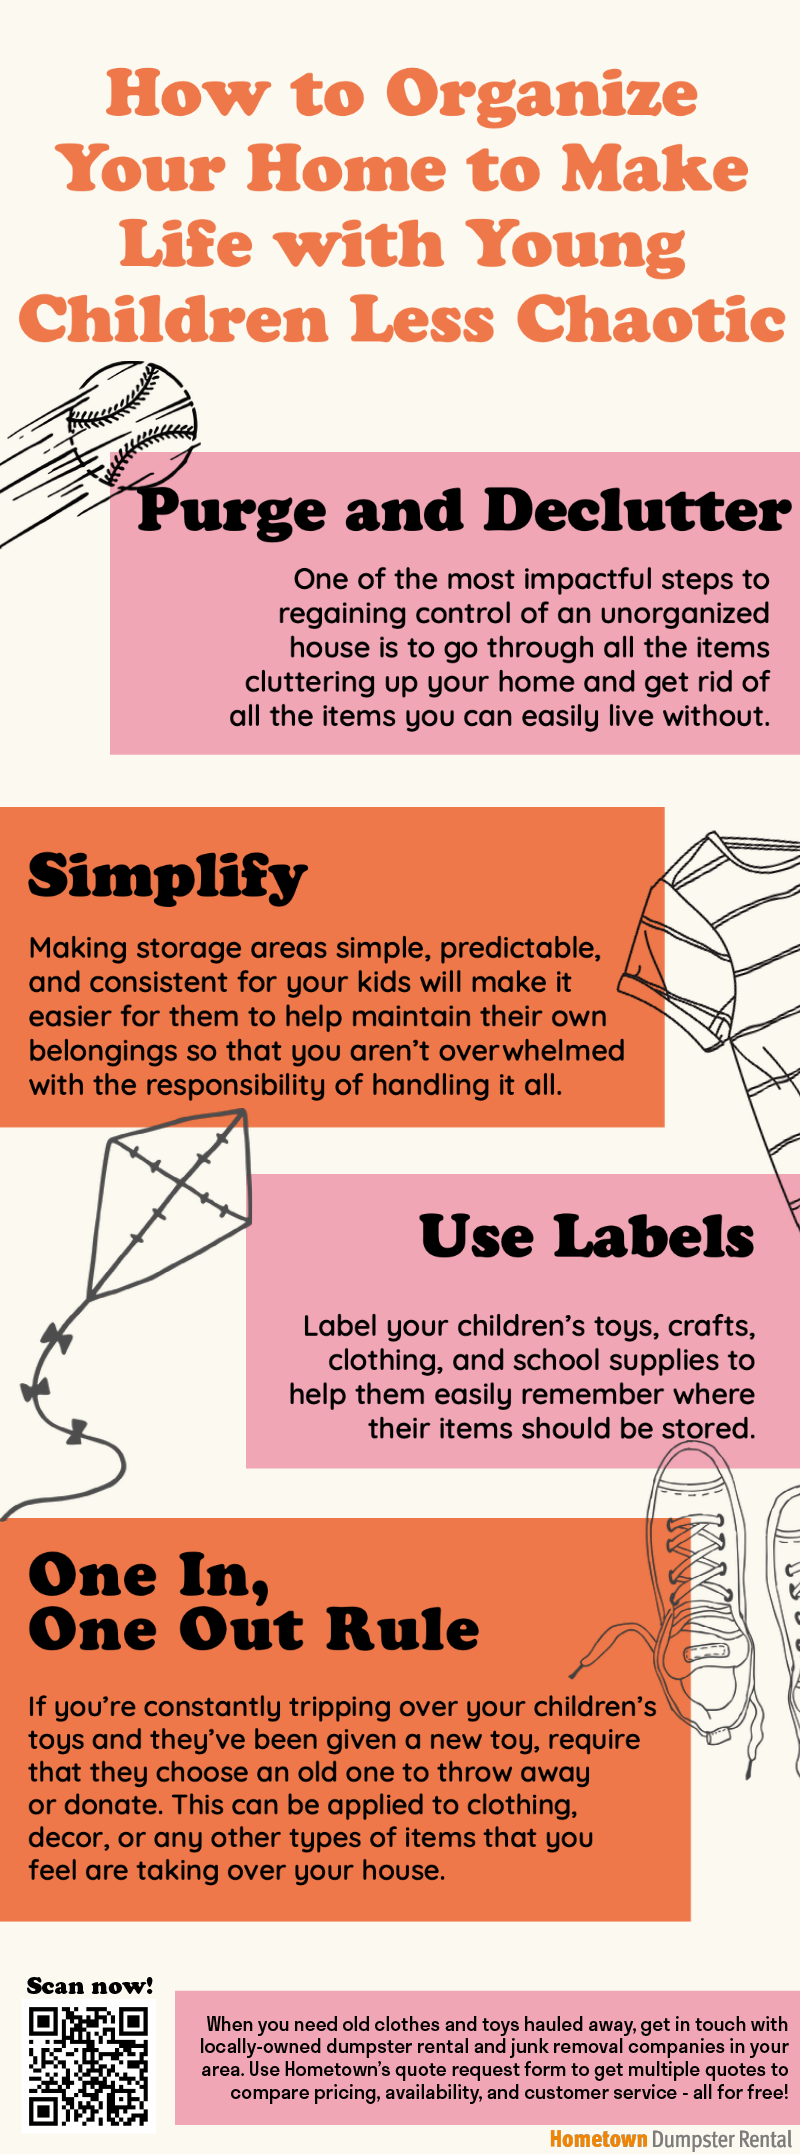 How to Organize Your Home to Make Your Life with Young Children Less Chaotic Infographic